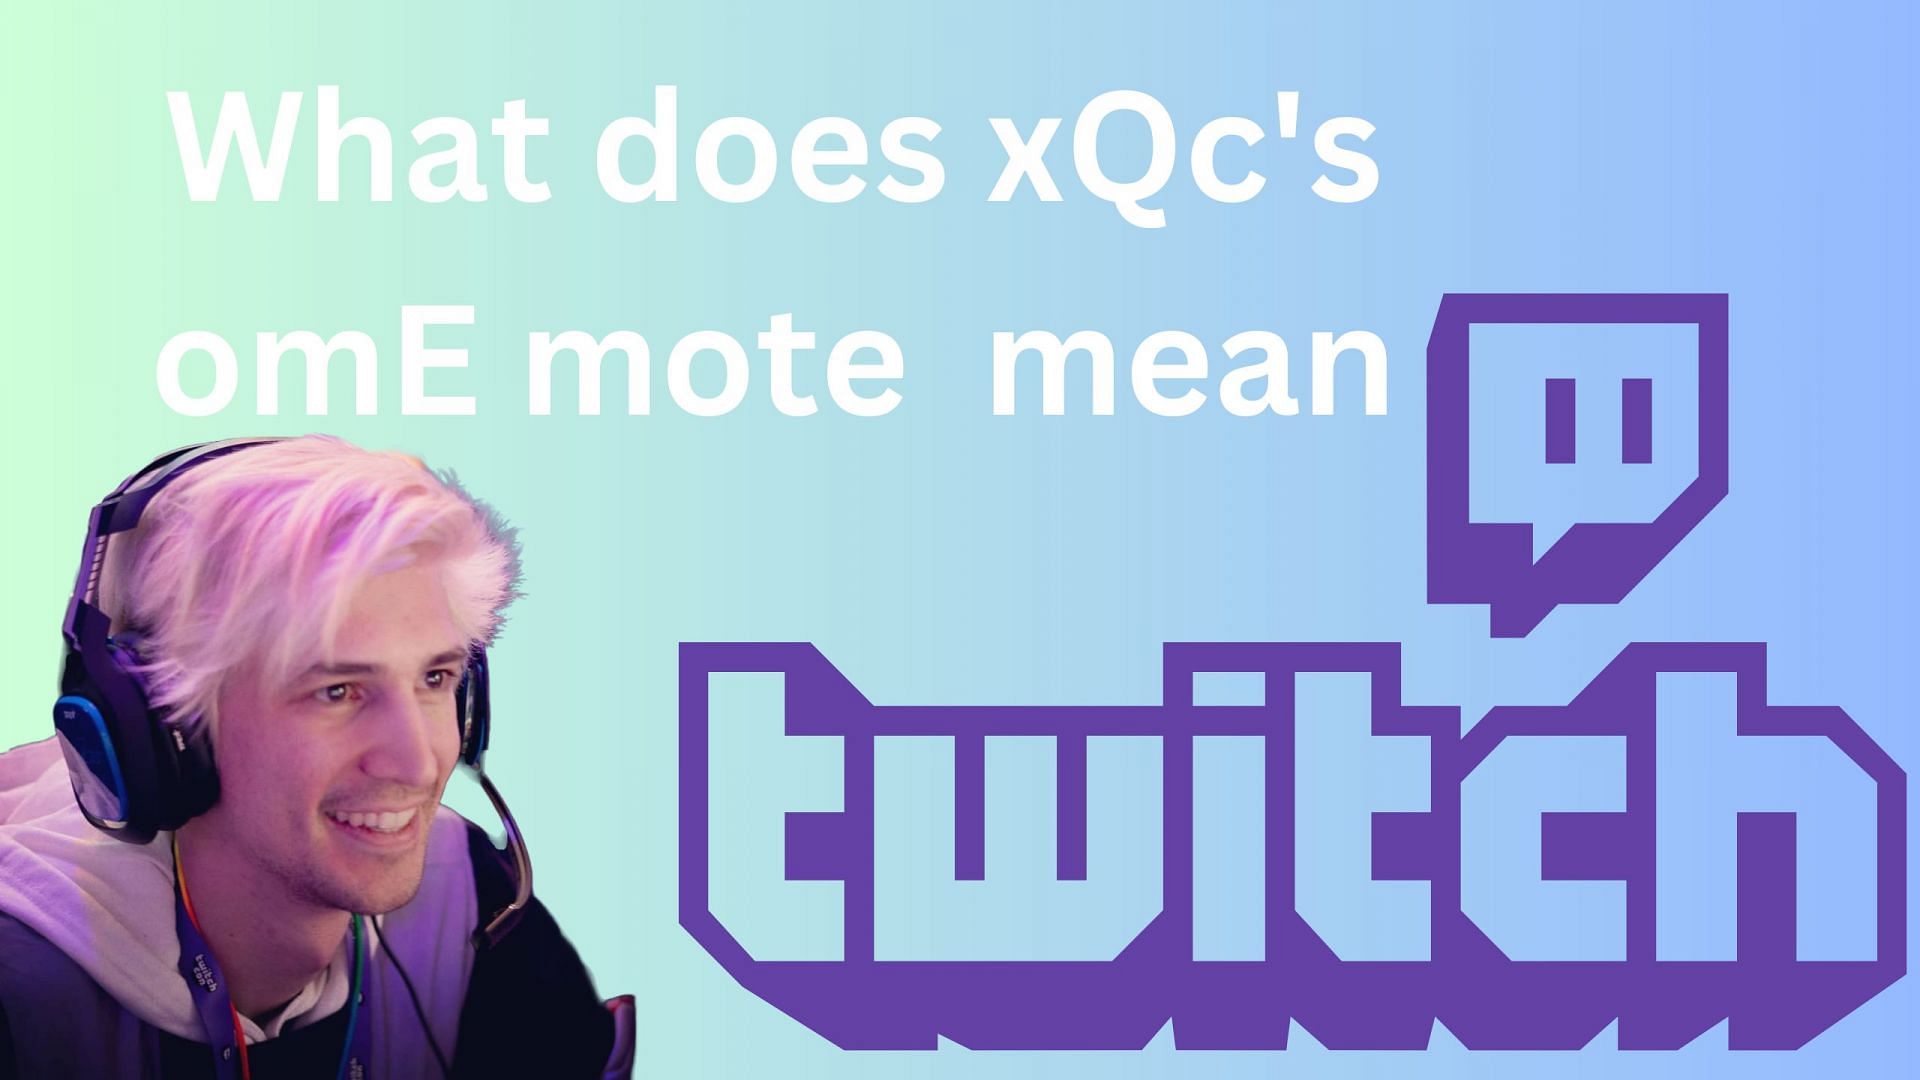 Exploring the origins and meaning of xQc